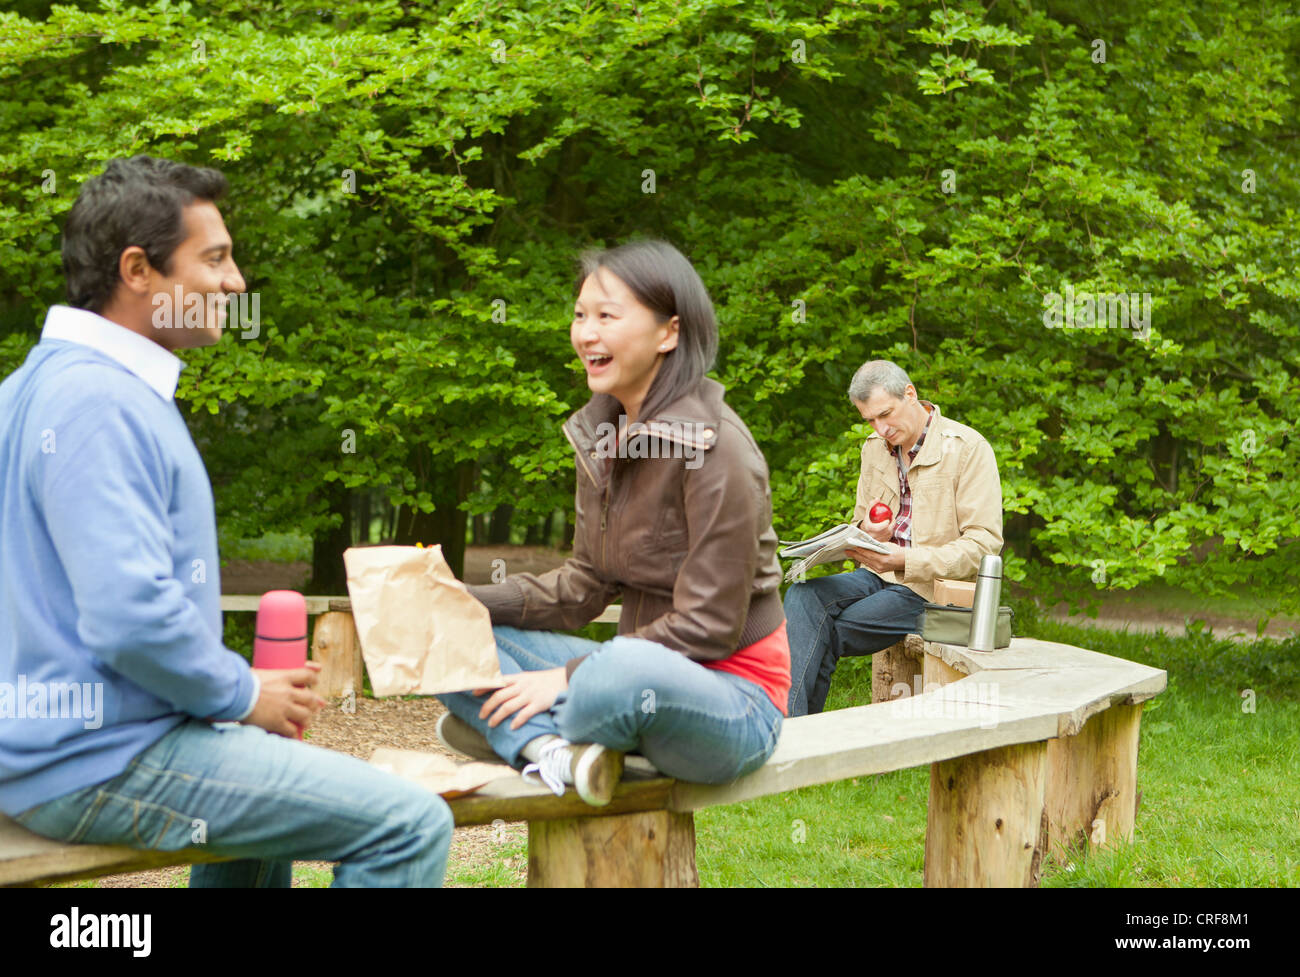 Couple talking on wooden bench in park Stock Photo